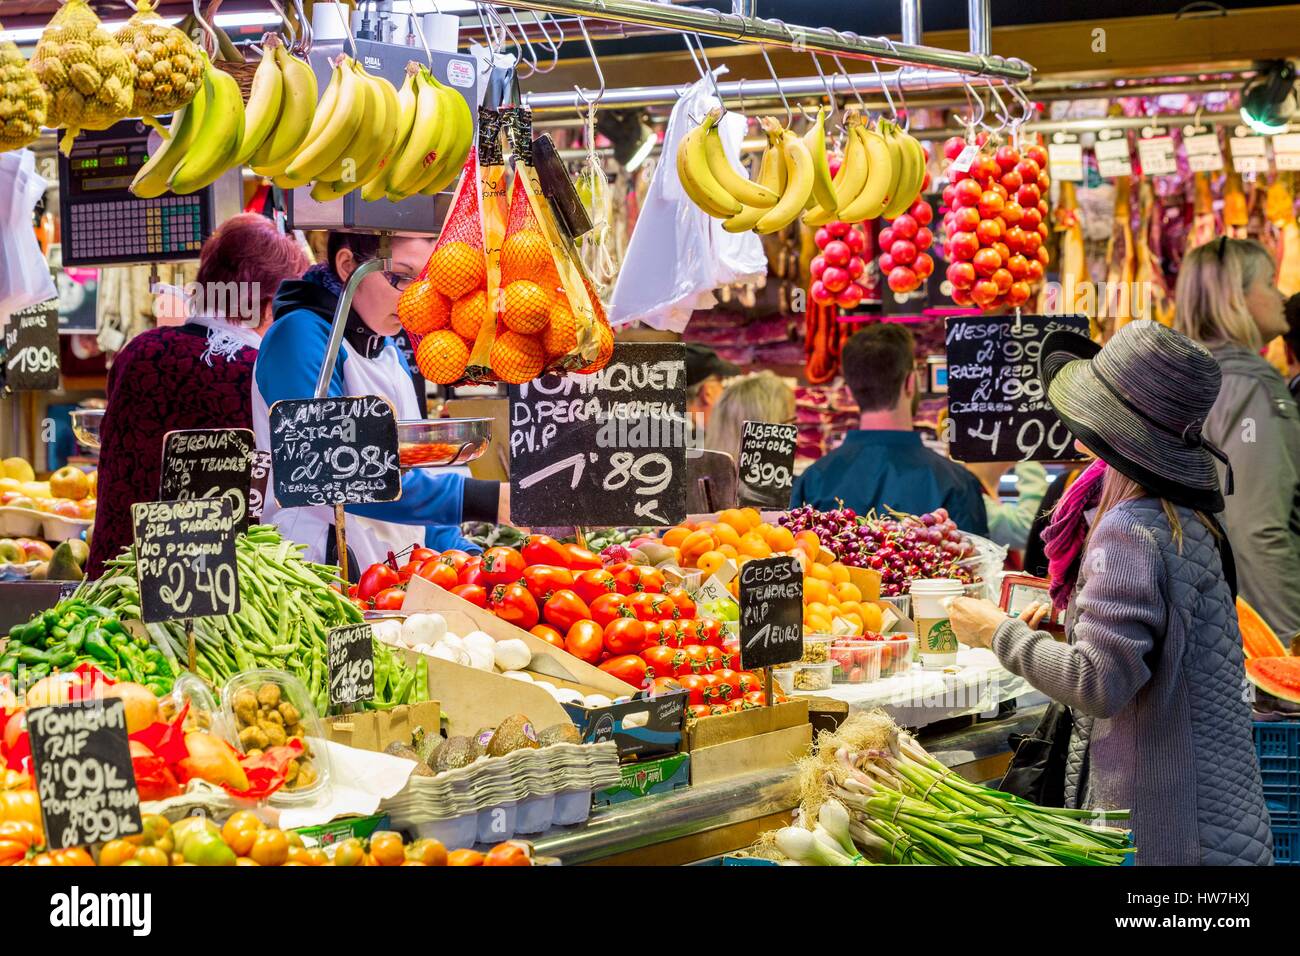 Spain, Catalonia, Barcelona, Ciutat Vella, the Boqueria market built in the mid 19th century, stalls of fruits and vegetables Stock Photo